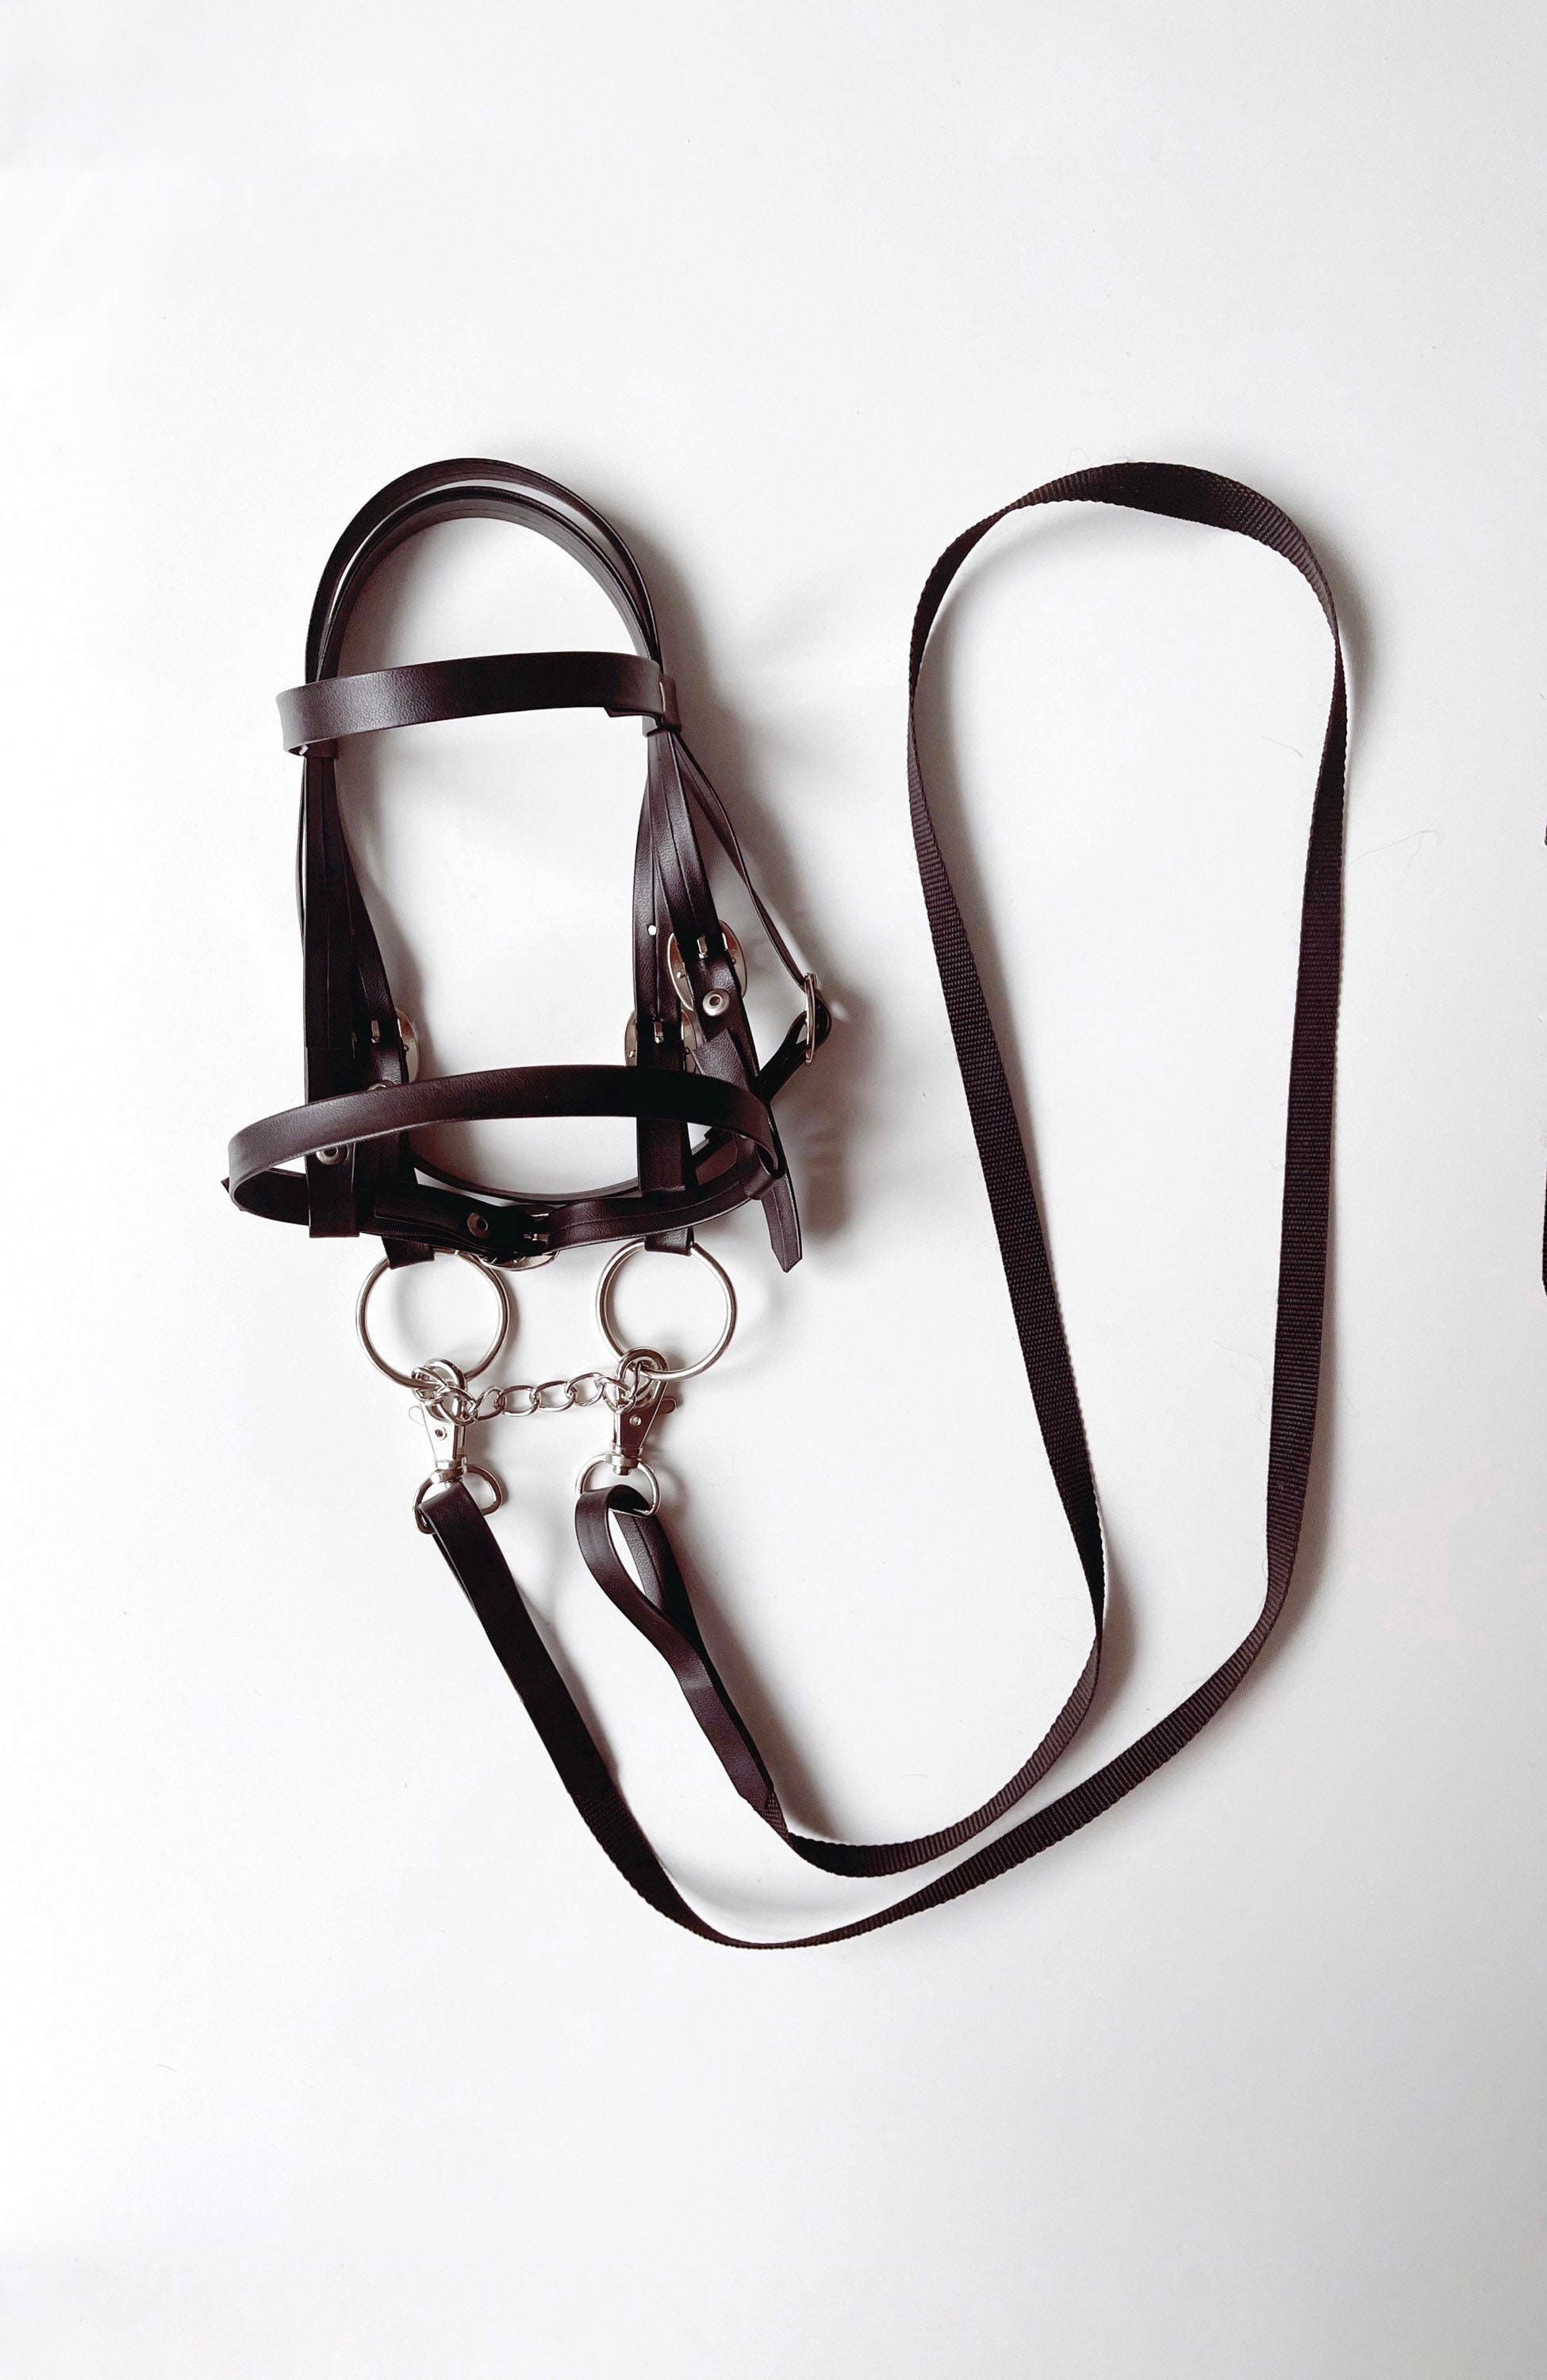 Black BRIDLE and REINS for Hobby Horse 